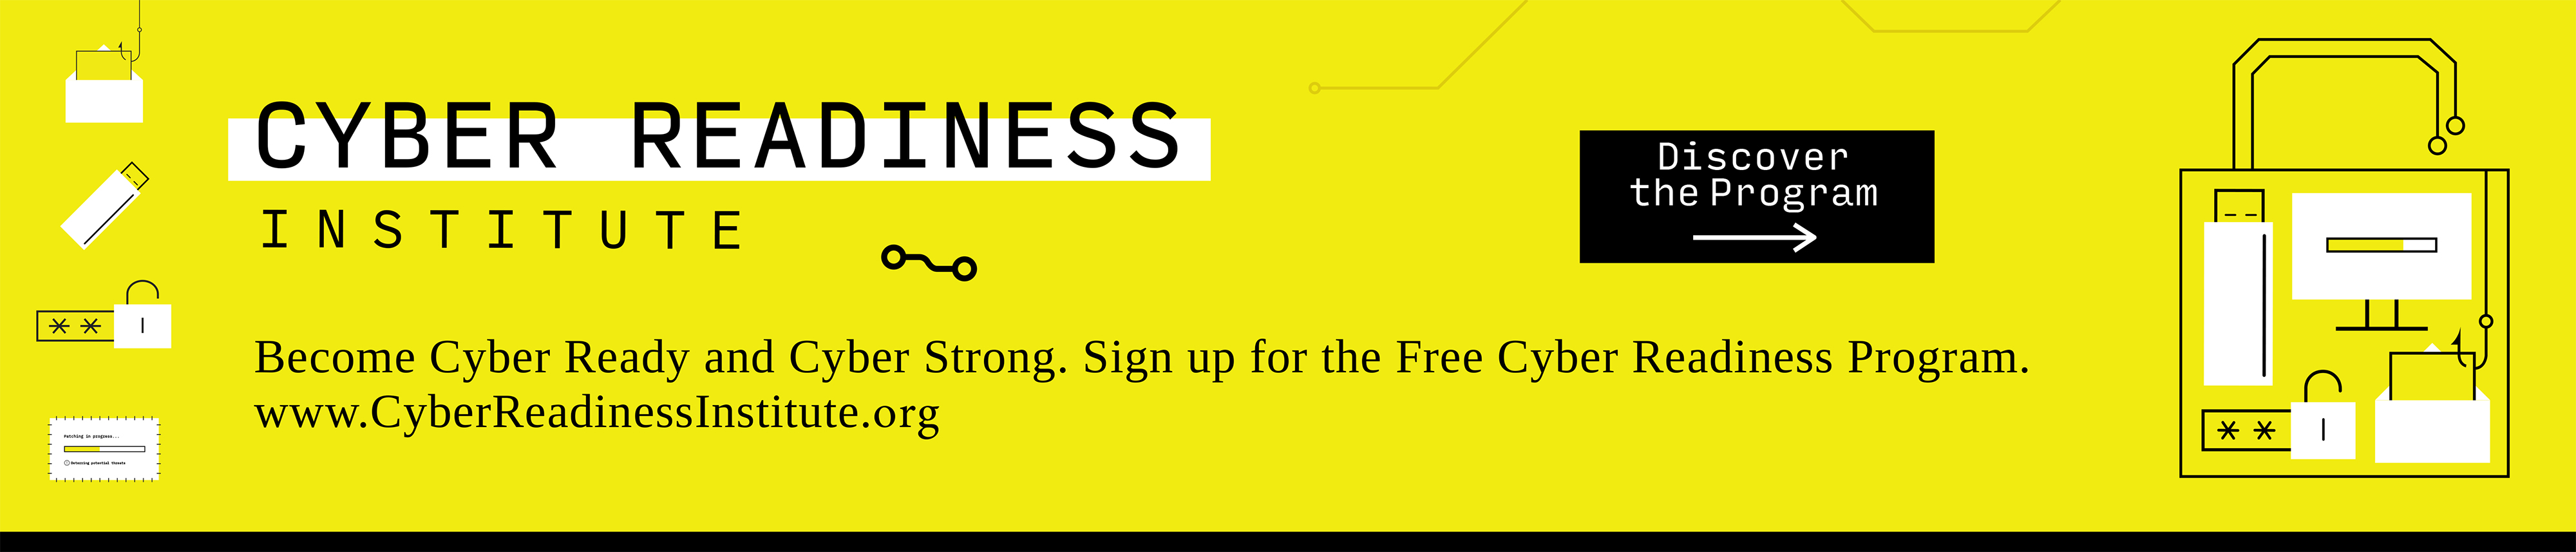 Cyber Readiness Institute (USA)